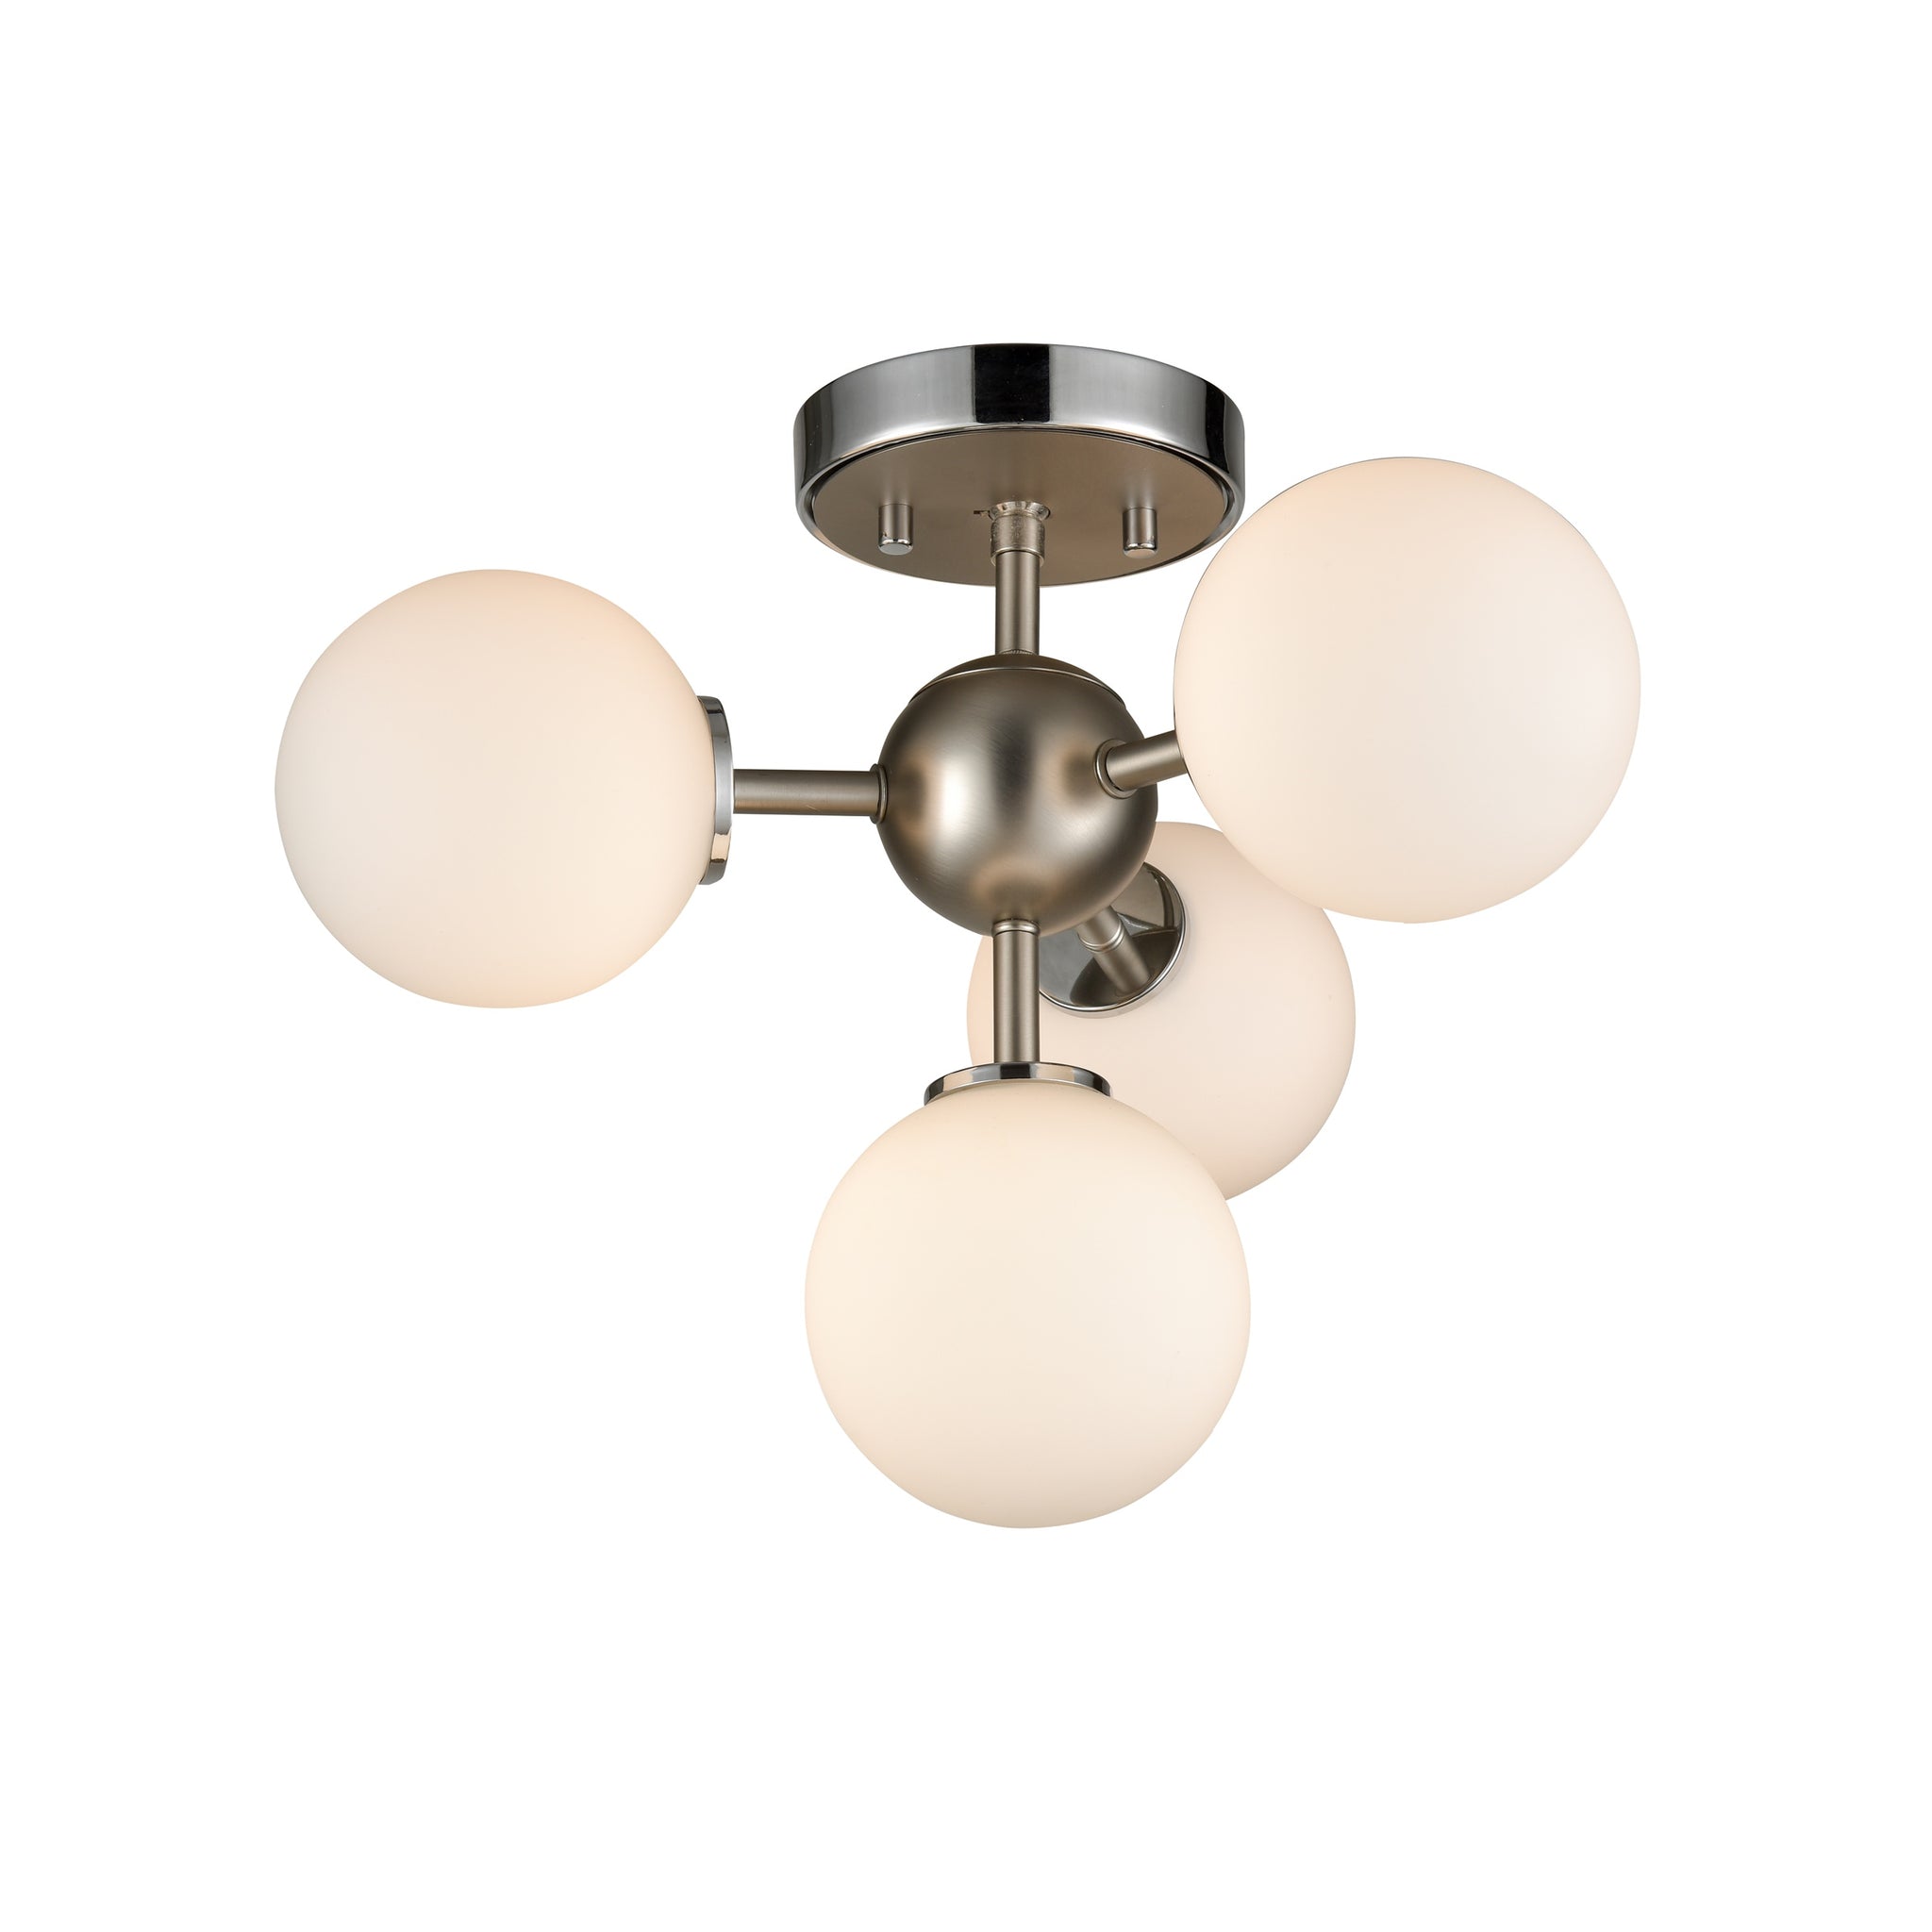 Alouette Semi Flush Mount Chrome and Buffed Nickel with Half Opal Glass